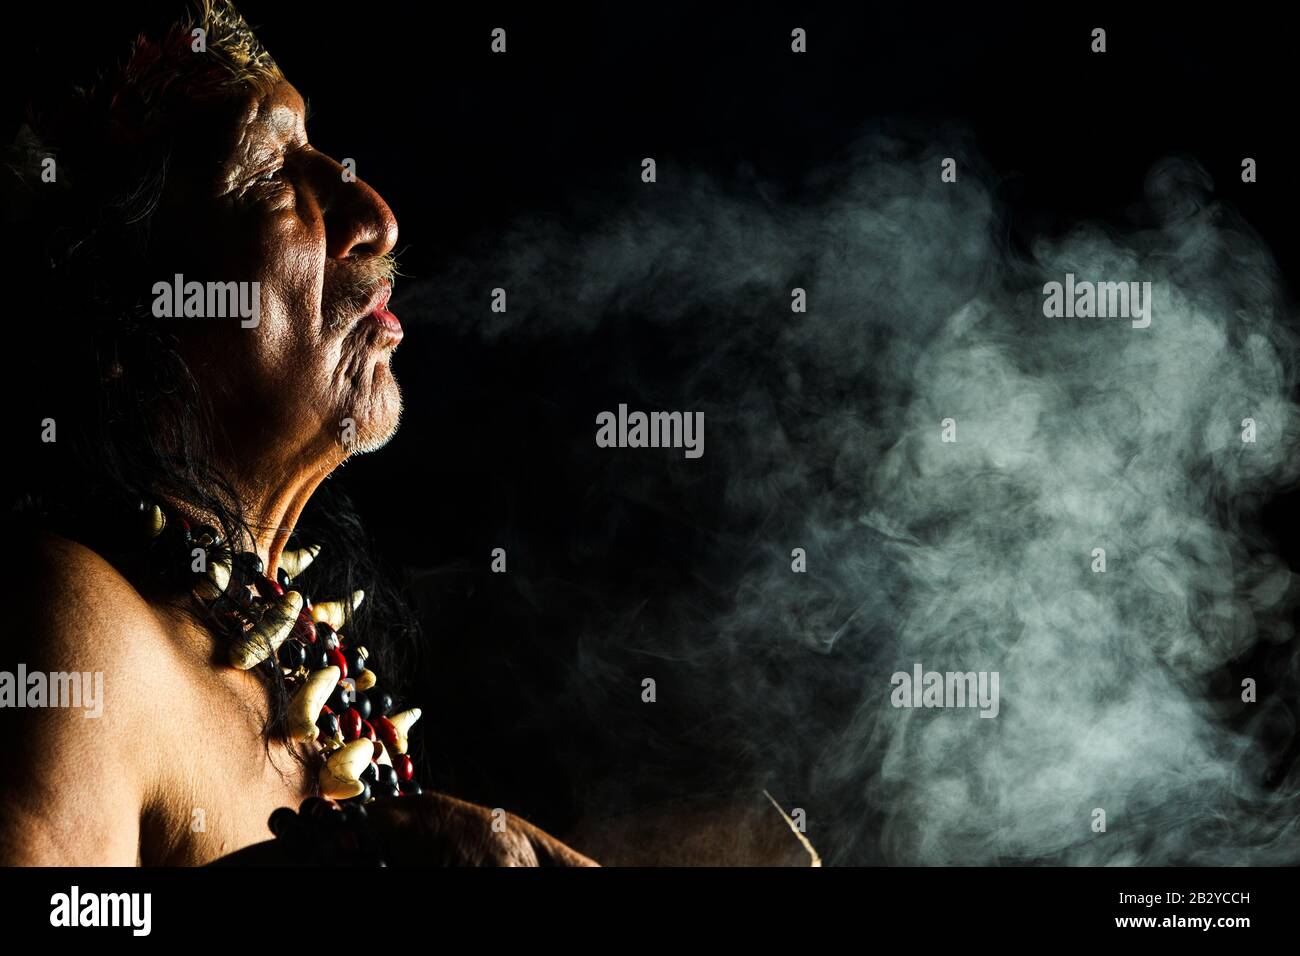 Sorcerer In Ecuadorian Amazon During A Real Ayahuasca Anniversary Model Released Picture As Seen In April 2015 Stock Photo